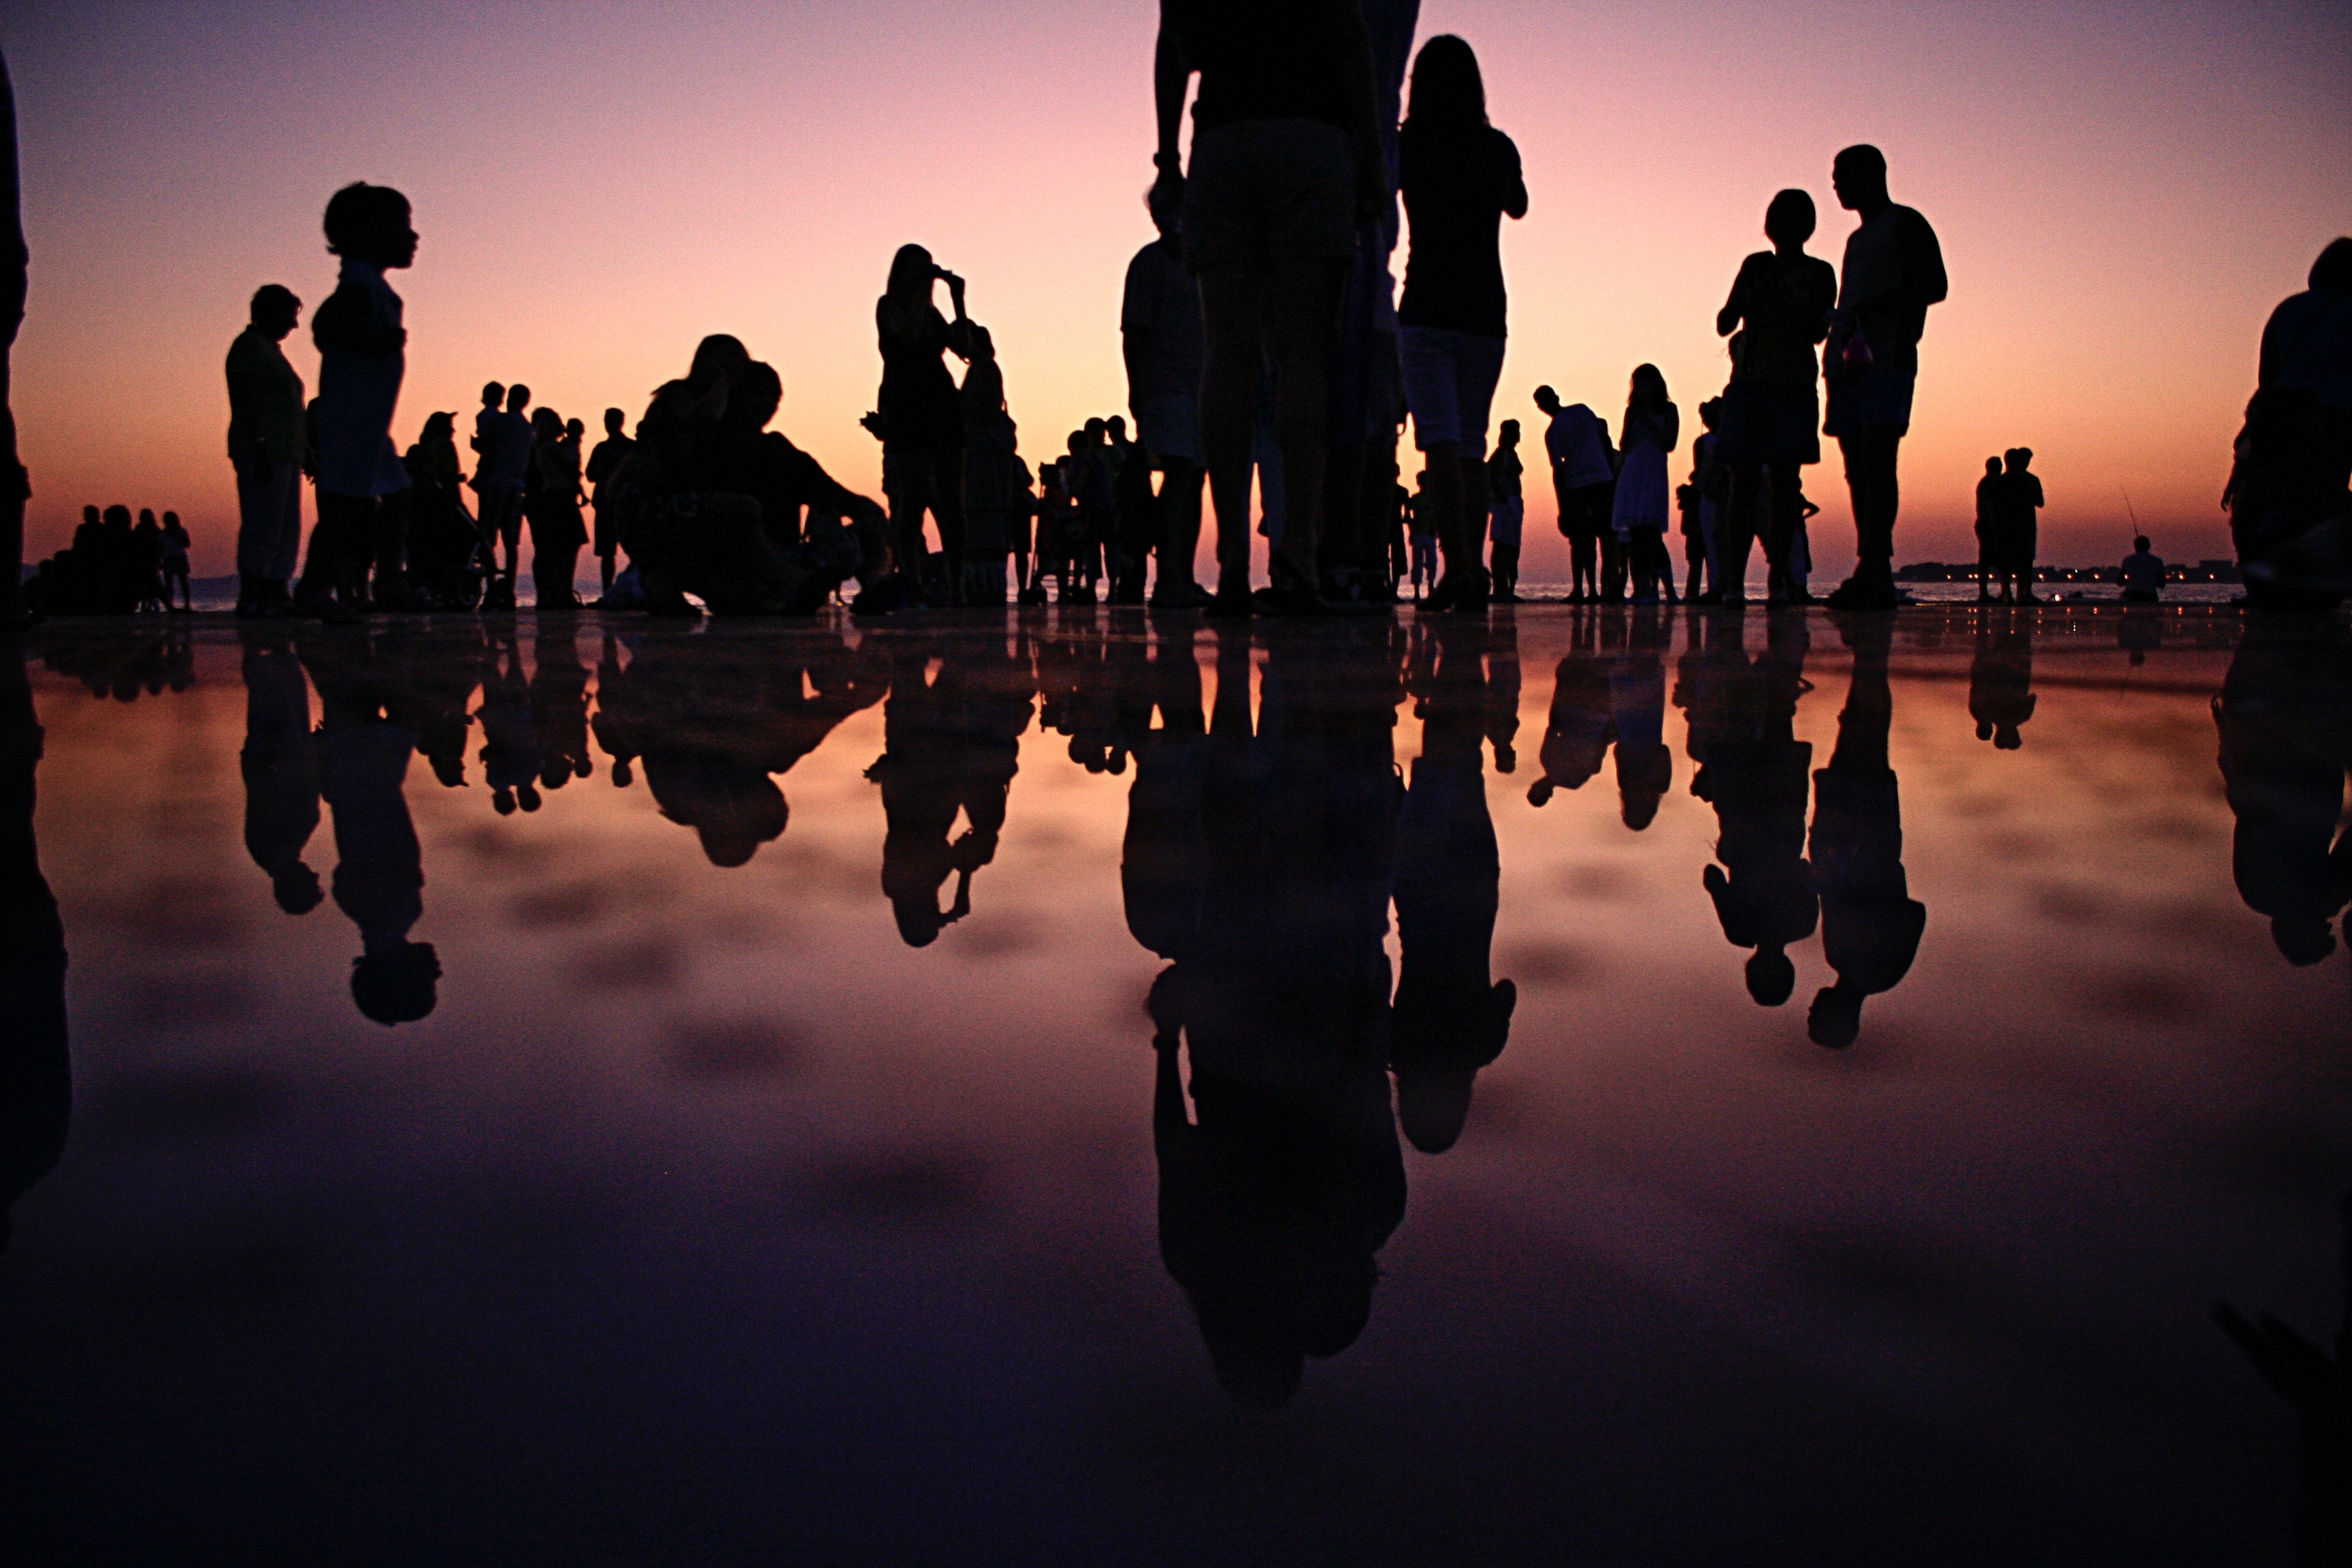 A crowd at a party with water showing their reflection in silhouette